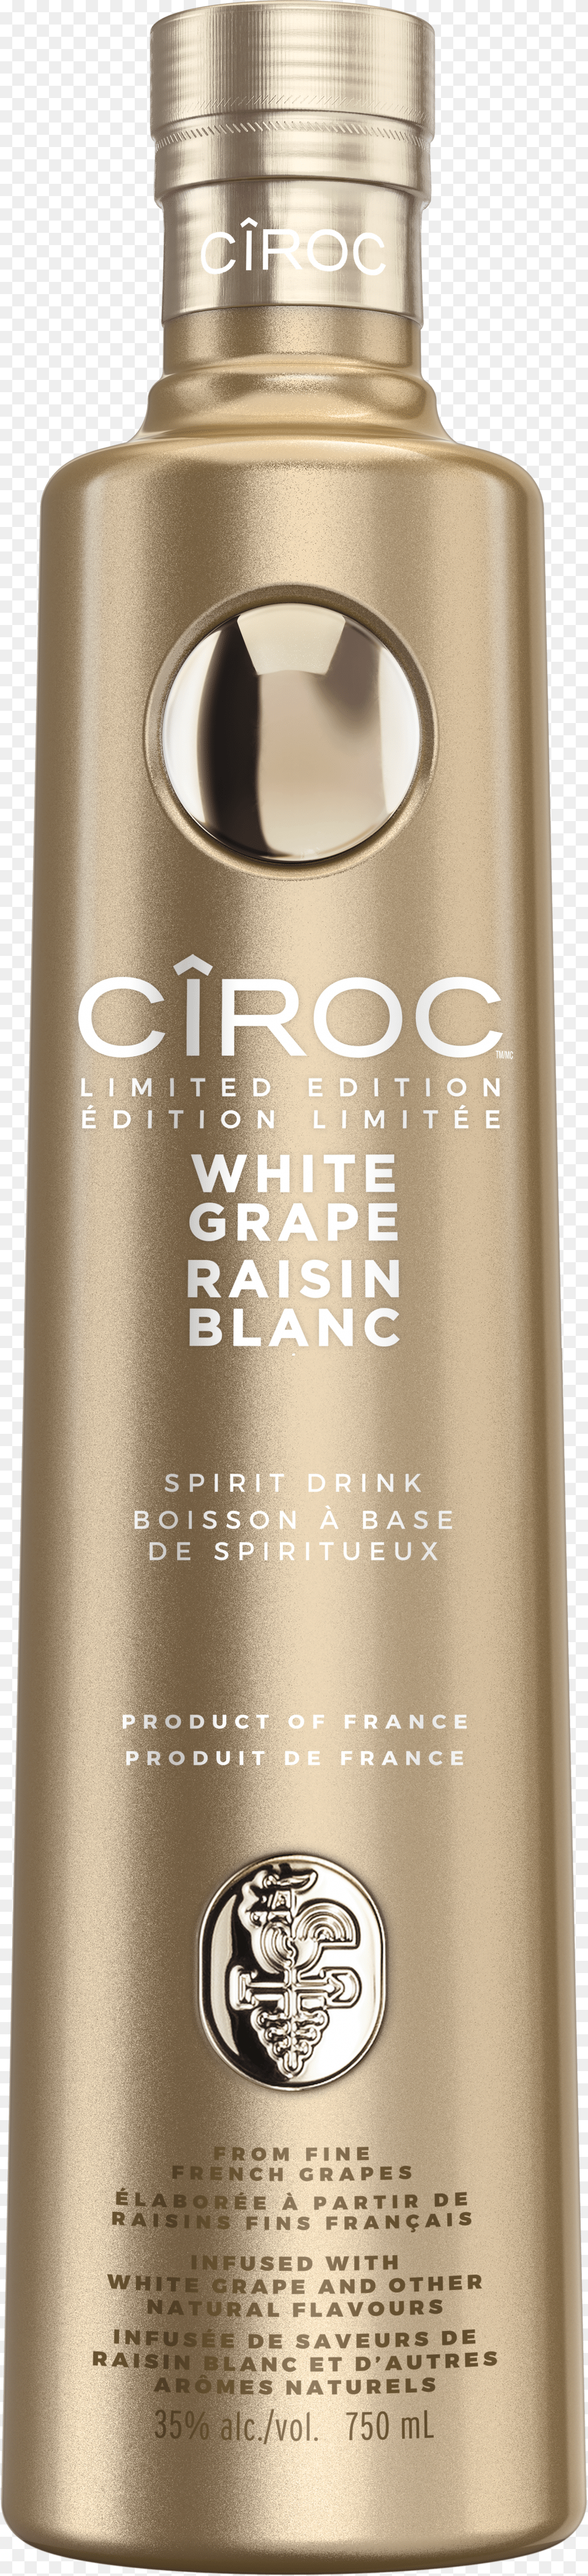 Ciroc White Grape Bottle Can Blond Png Image